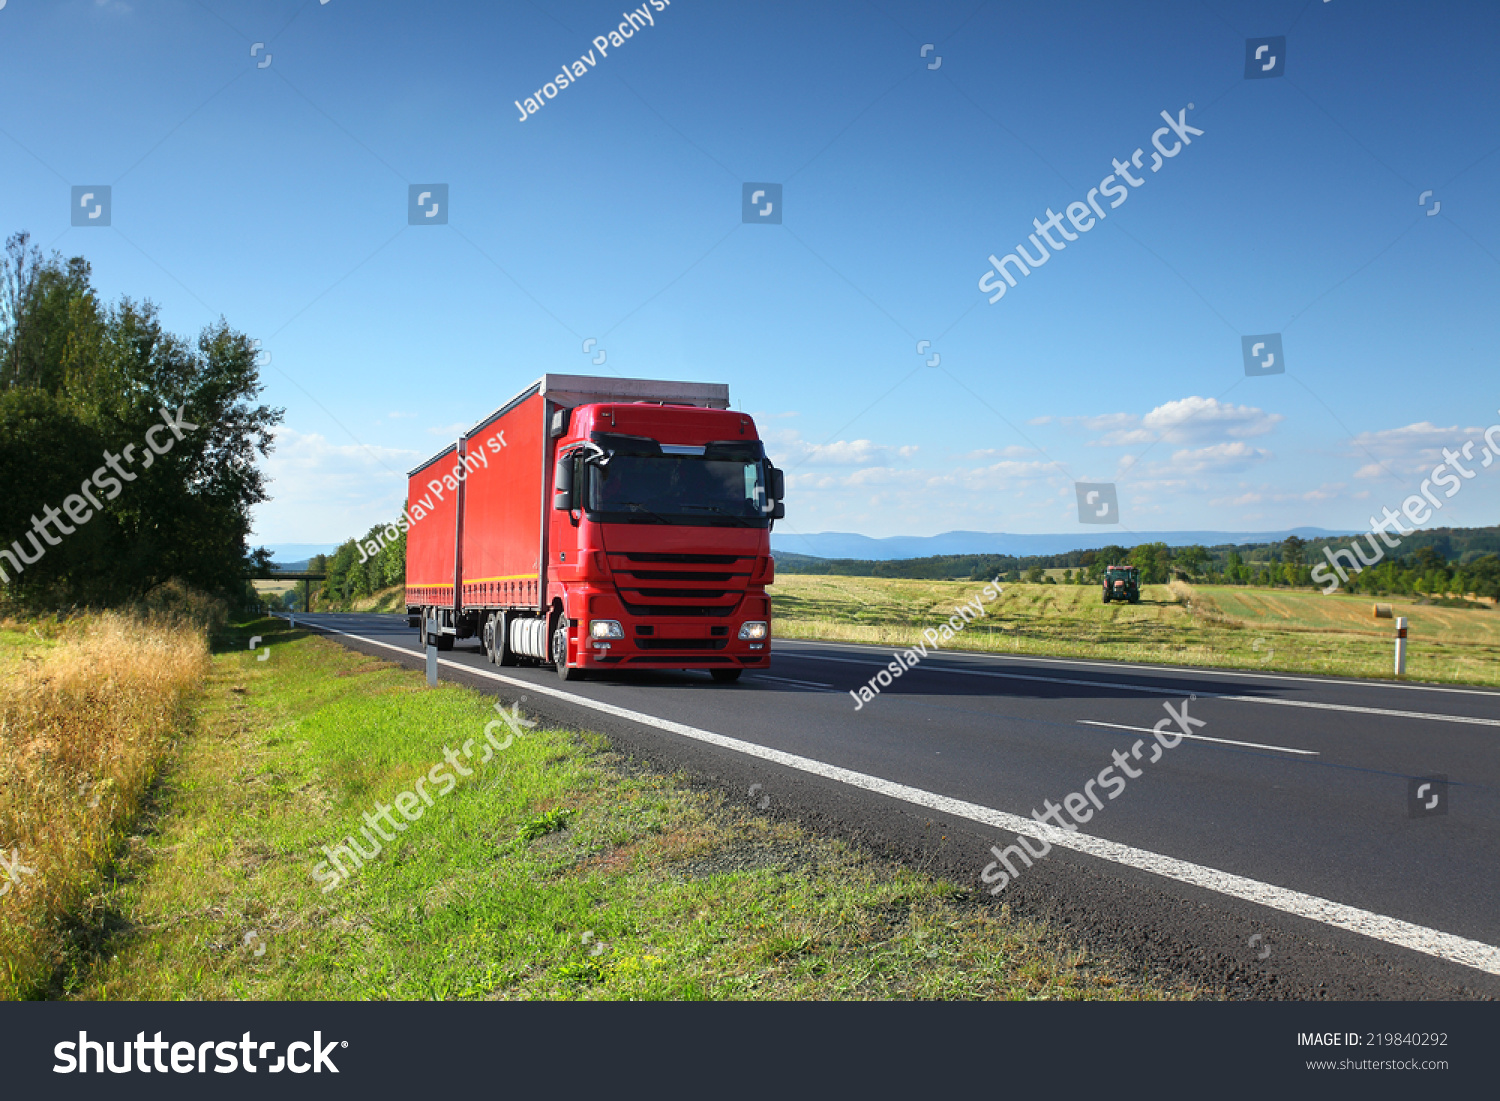 Truck on the road #219840292